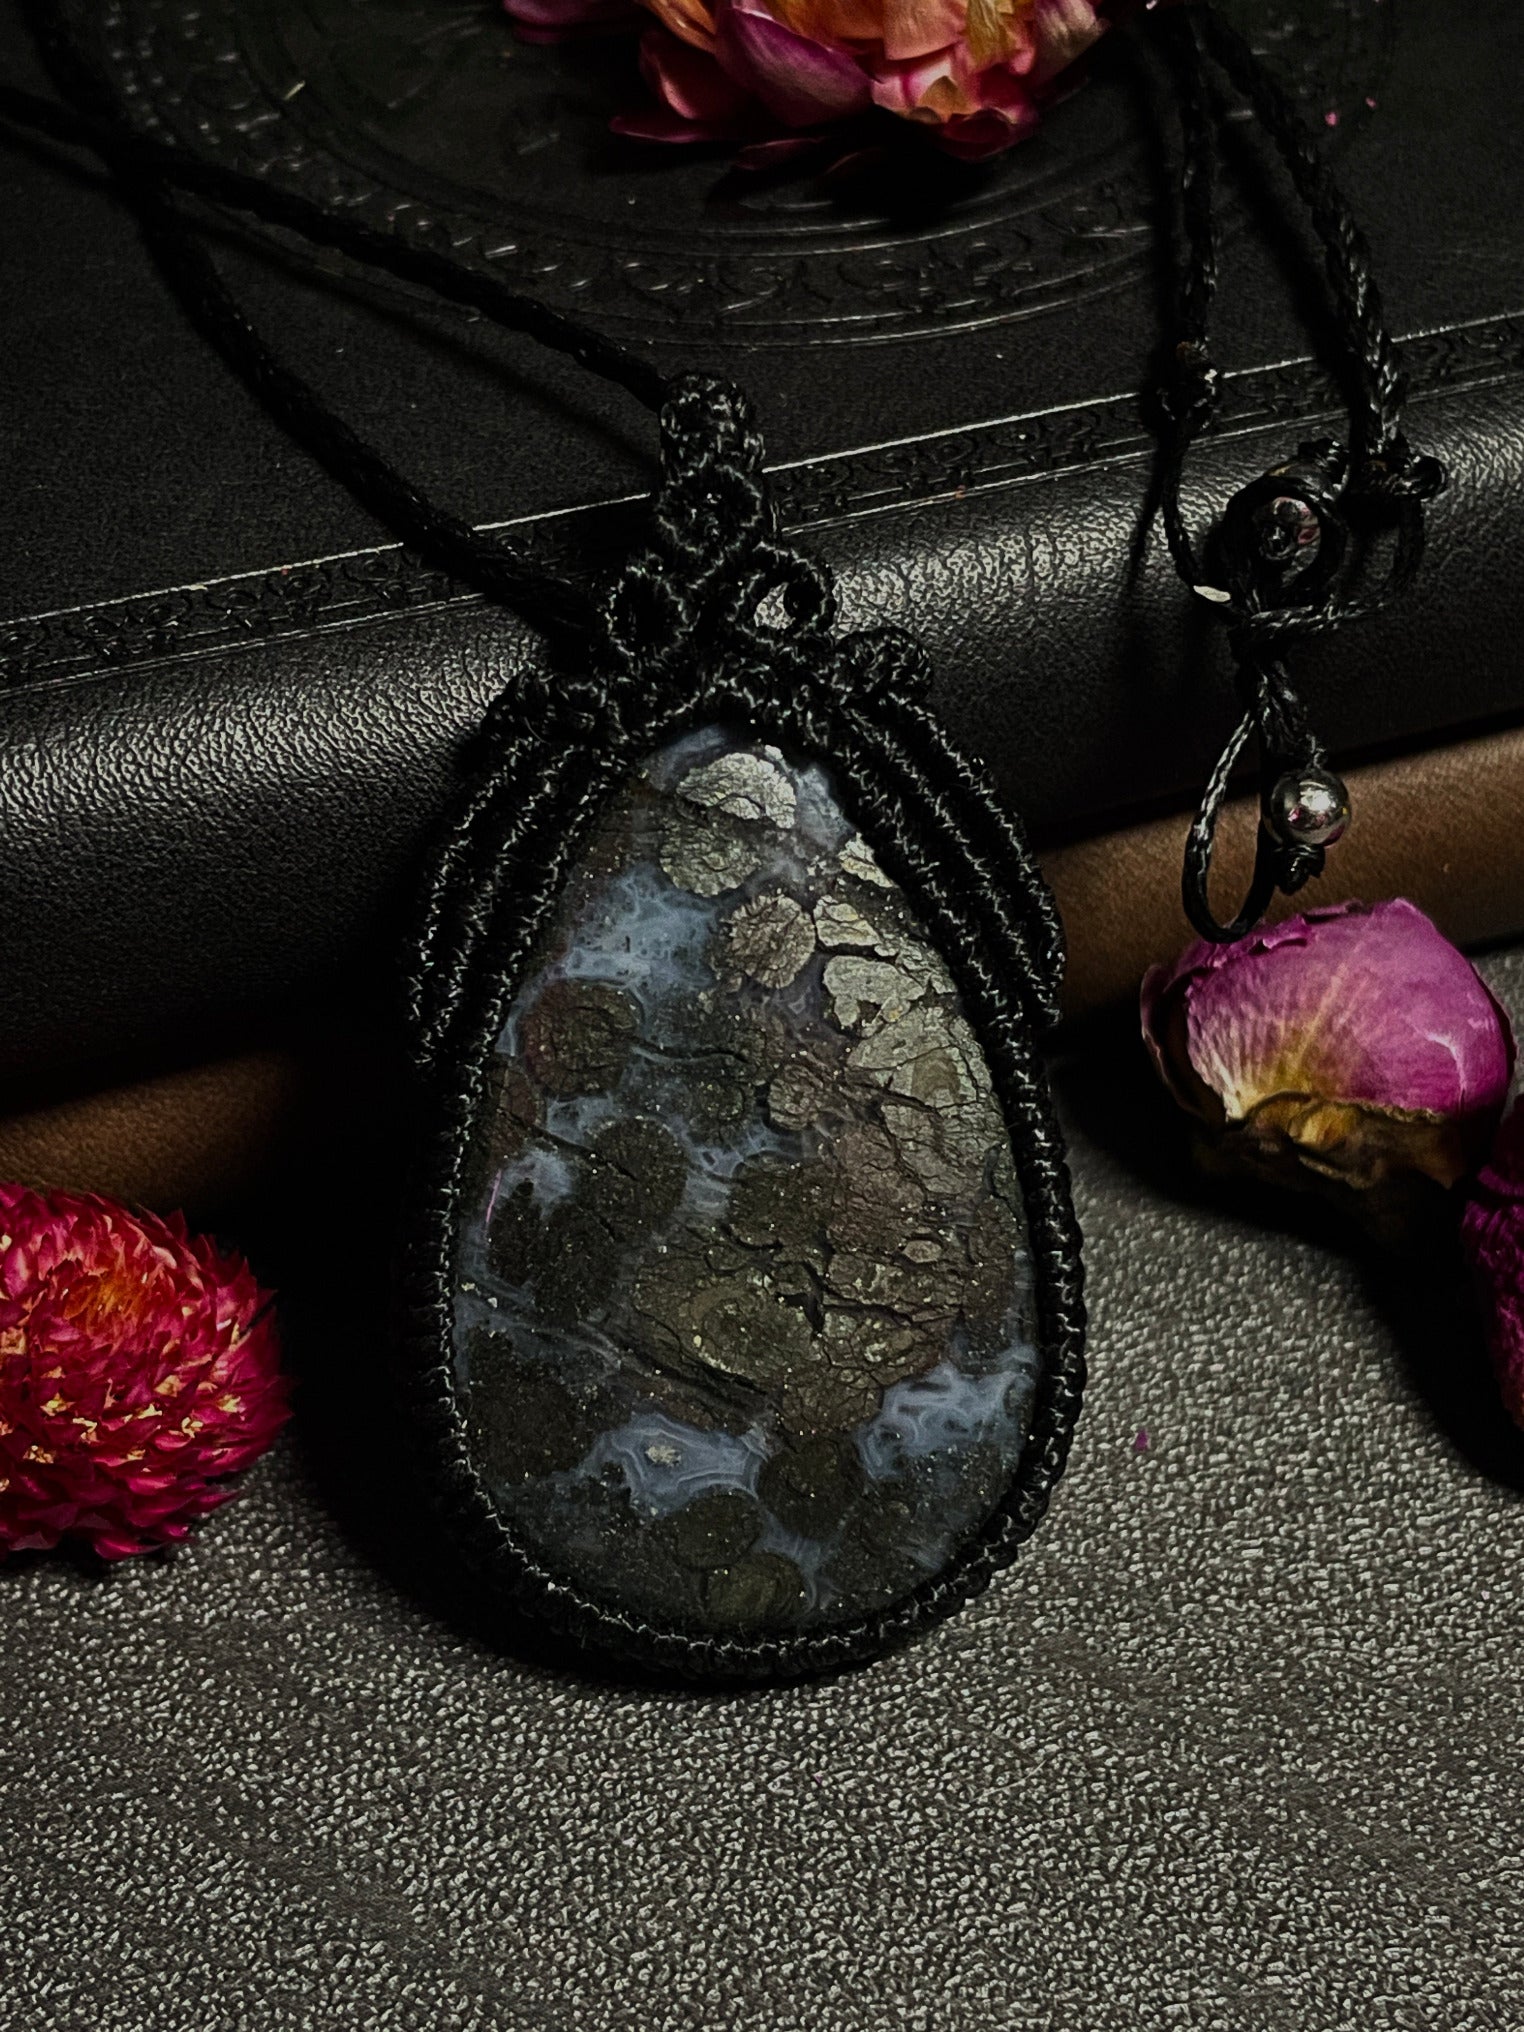 Pictured is a marcasite in agate cabochon wrapped in macrame thread. A gothic book and flowers are nearby.